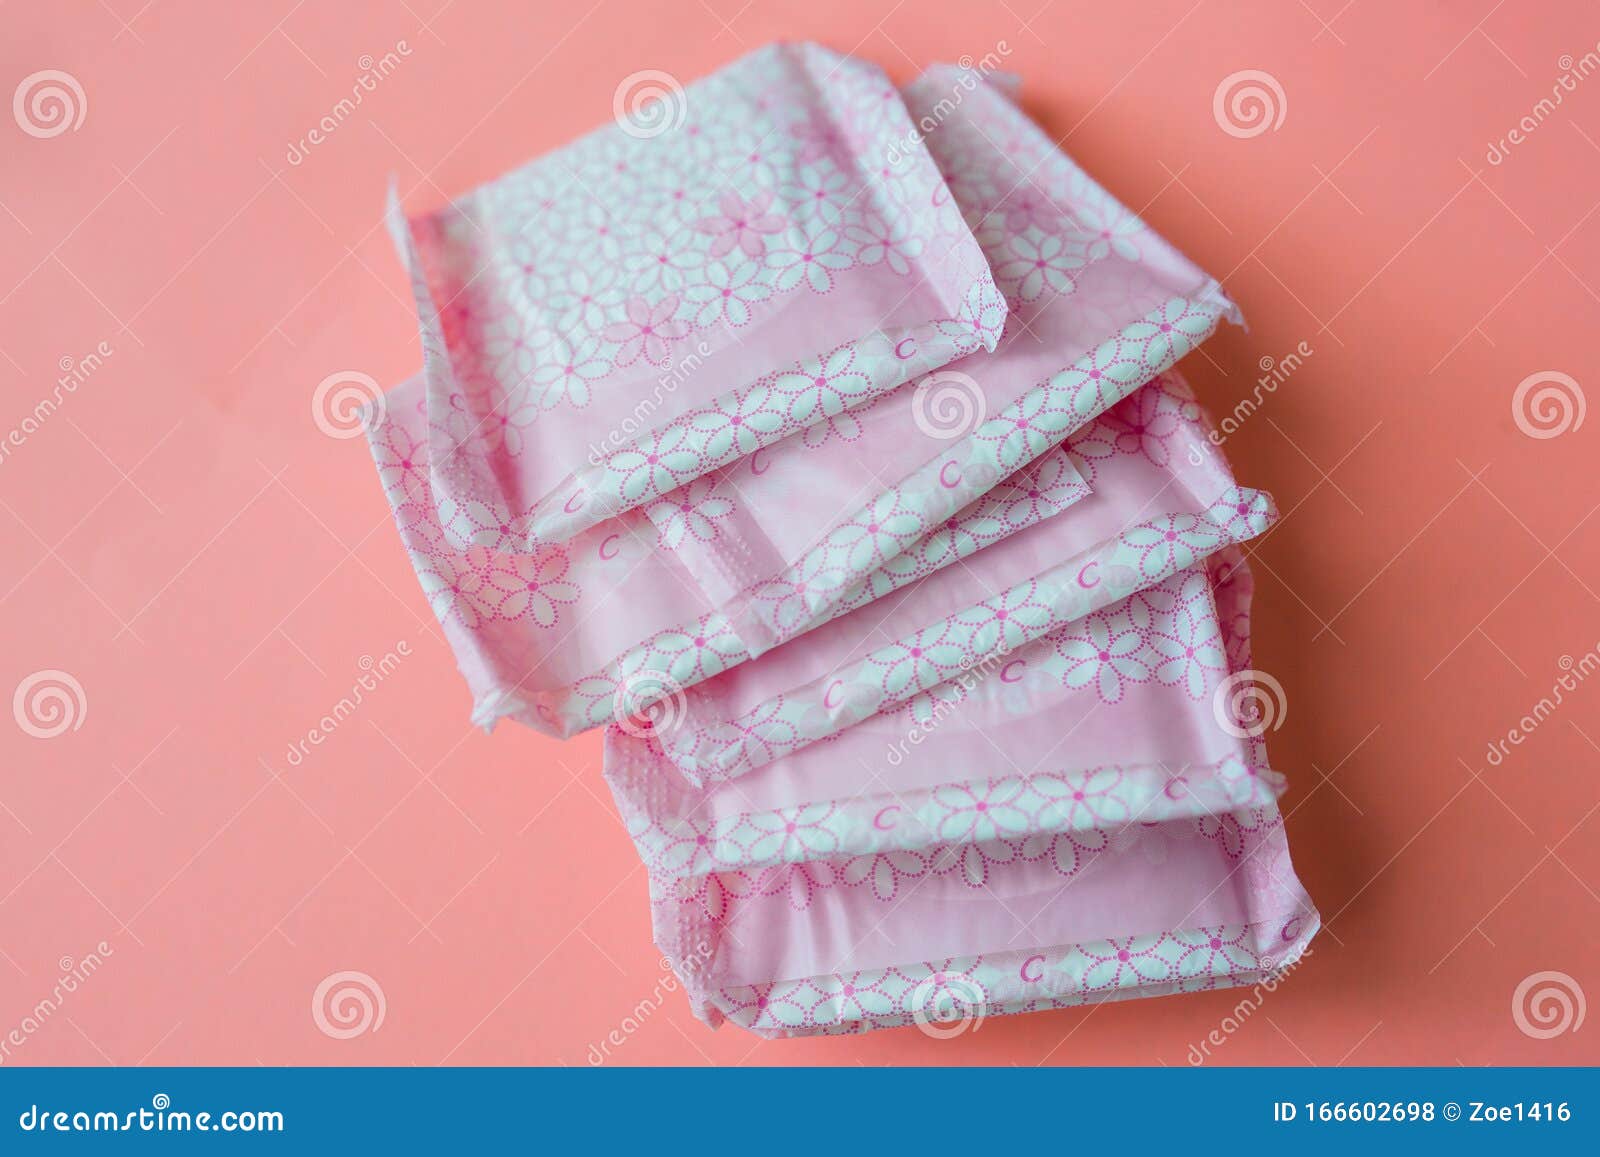 menstruation, wrapped pink period pads against pink background